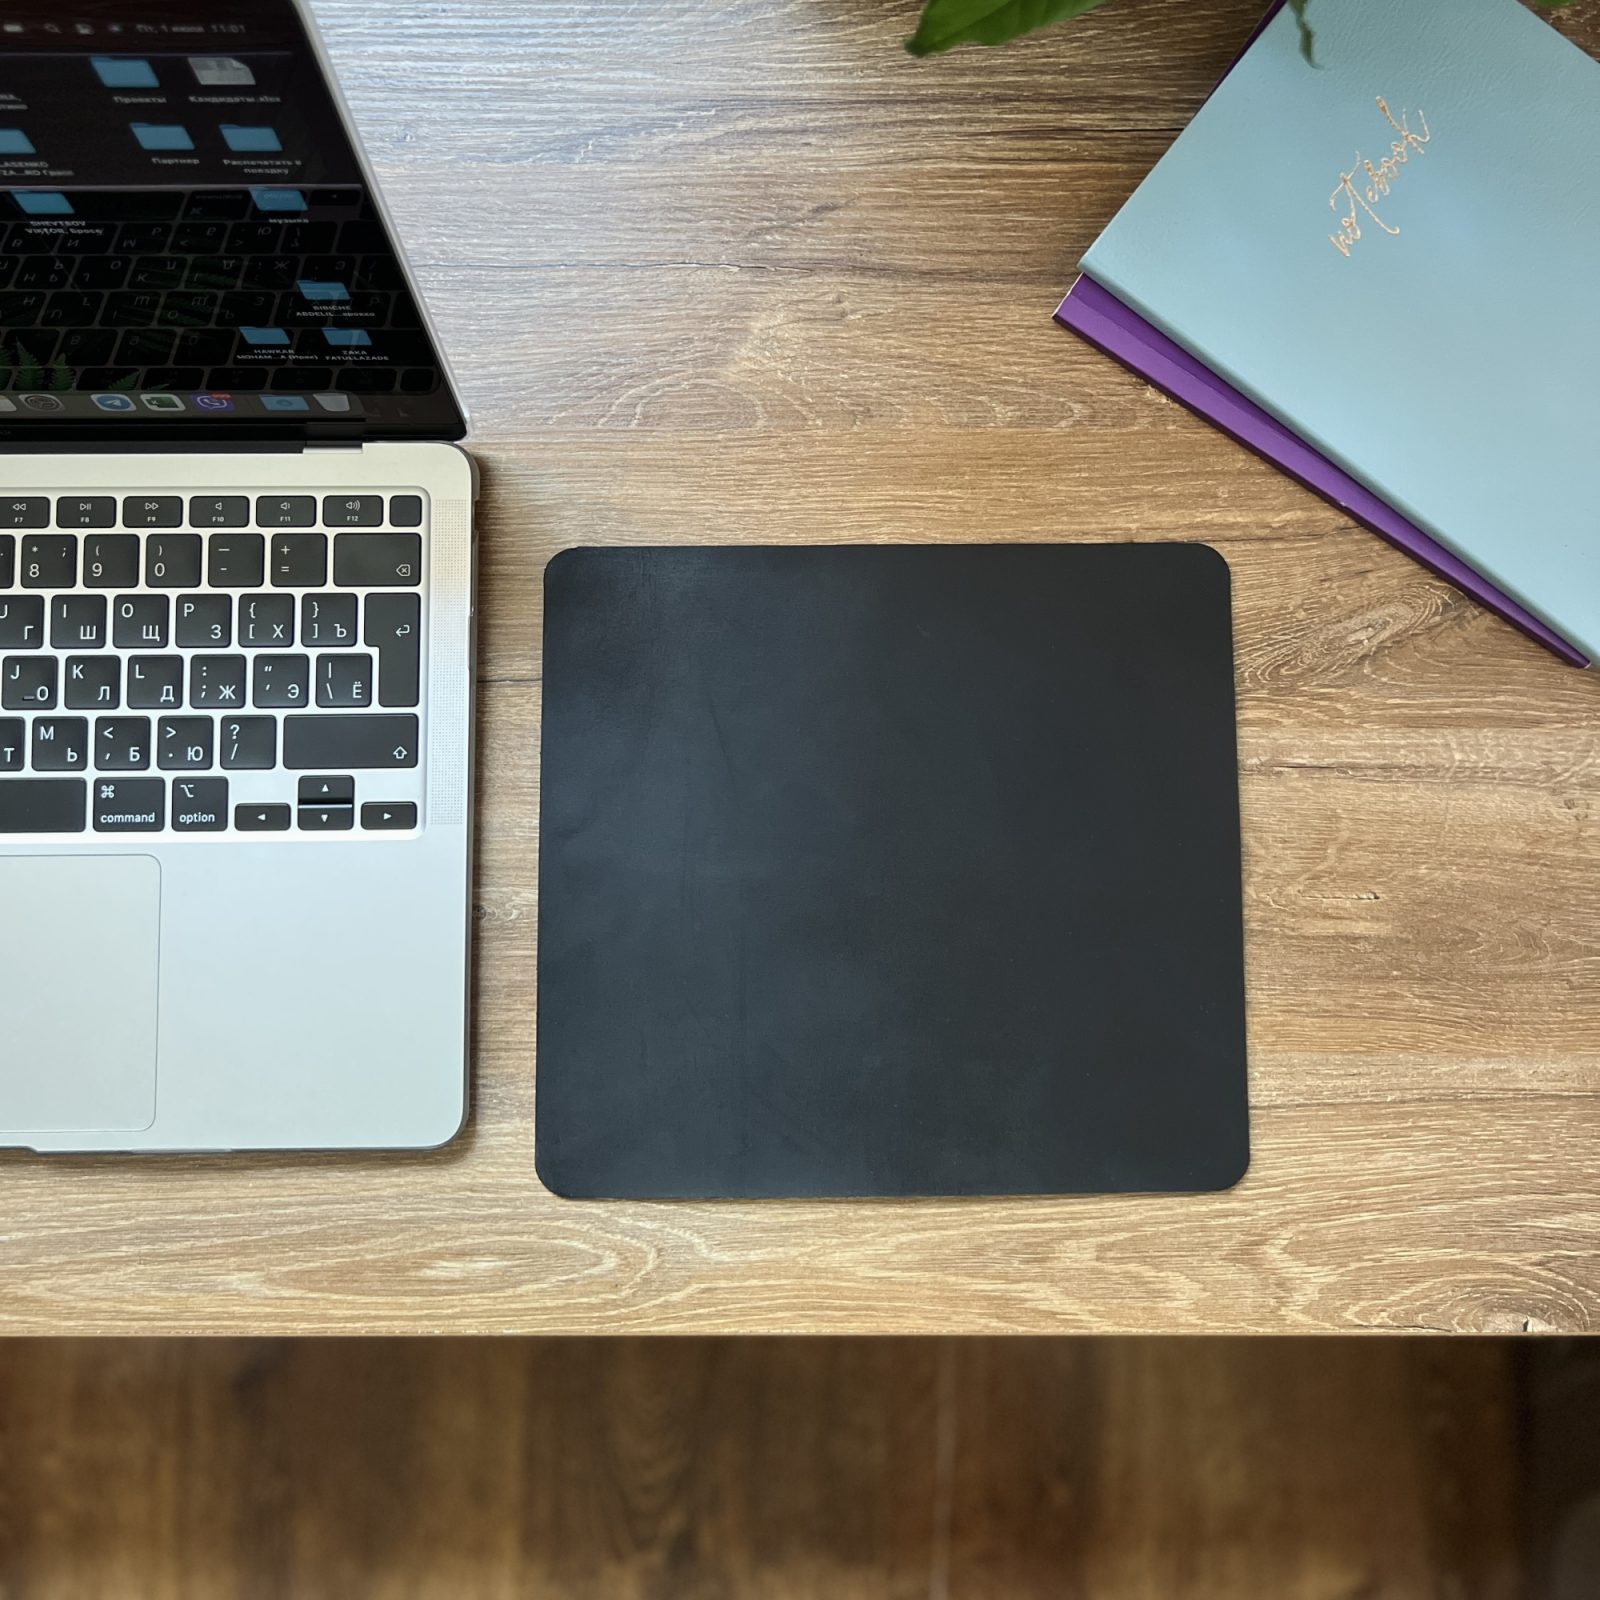 https://luniko.net/wp-content/uploads/2023/04/Customized-leather-mouse-pad-black-for-husband.jpg